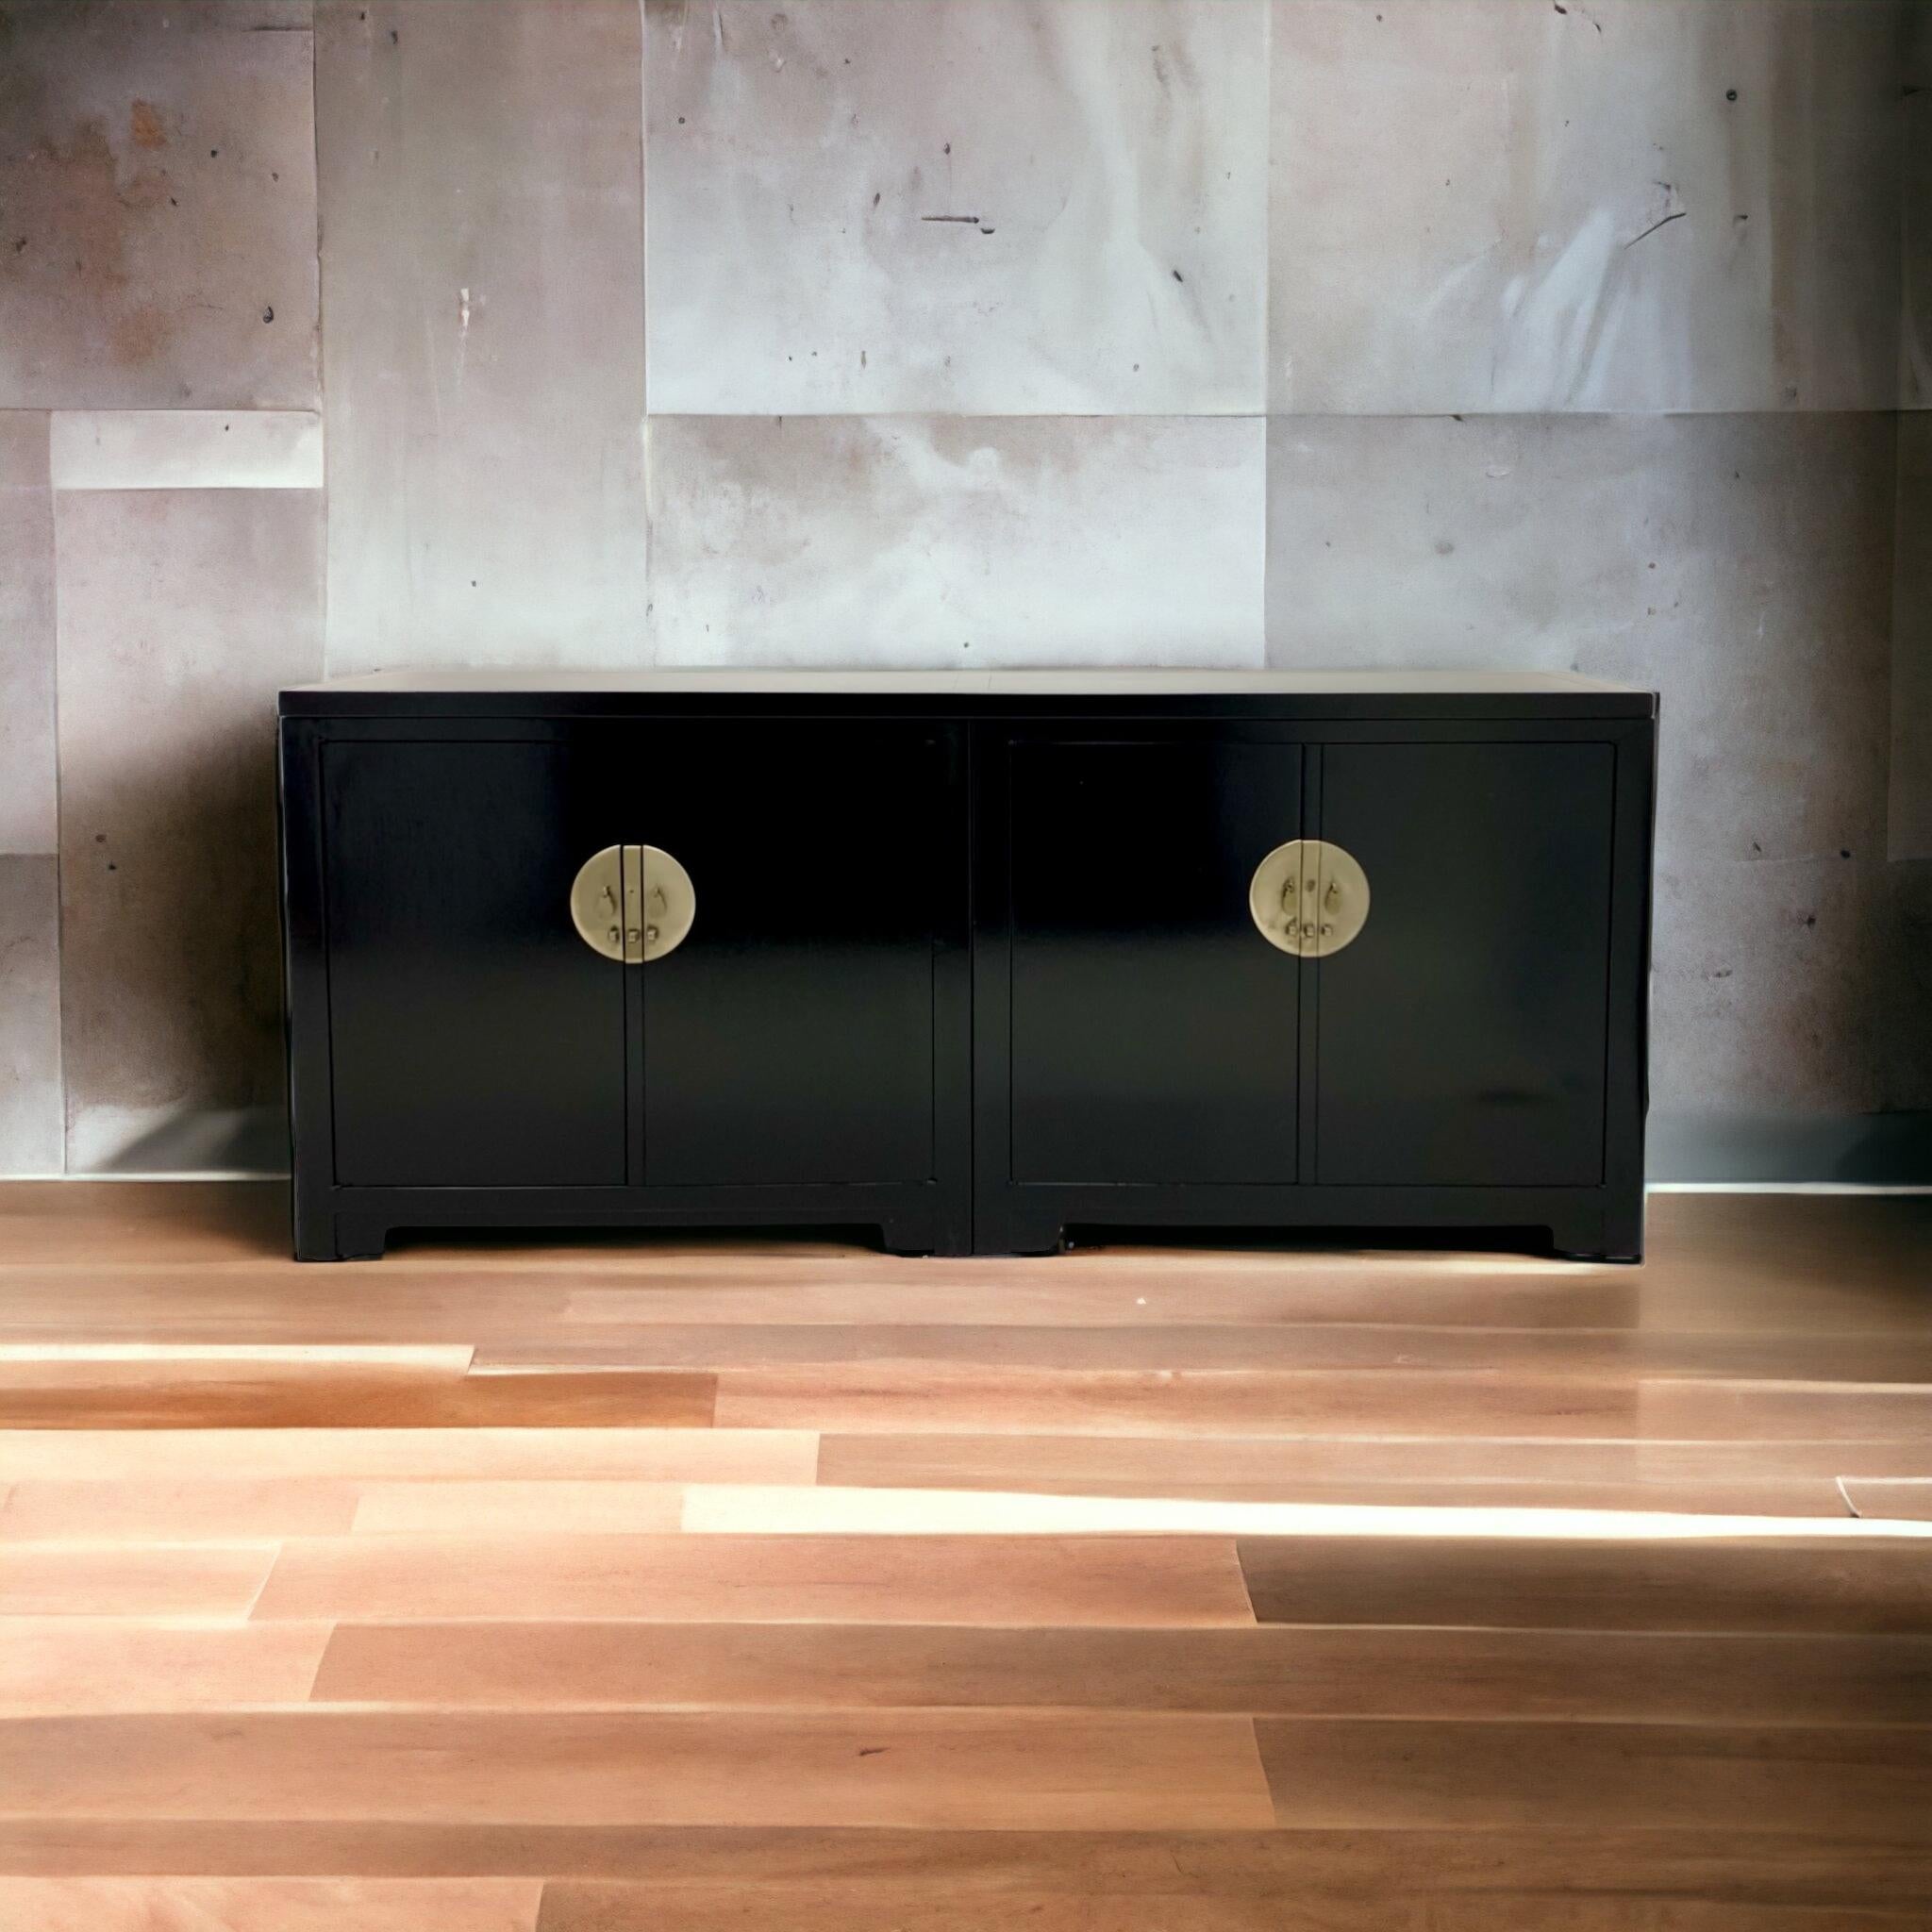 This is a handsome, timeless credenza designed by Michael Taylor for Baker Furniture as part of his Far East Collection. The black lacquer finish is recent. This is a three part credenza comprised of two cabinets and a long top. It opens to storage.